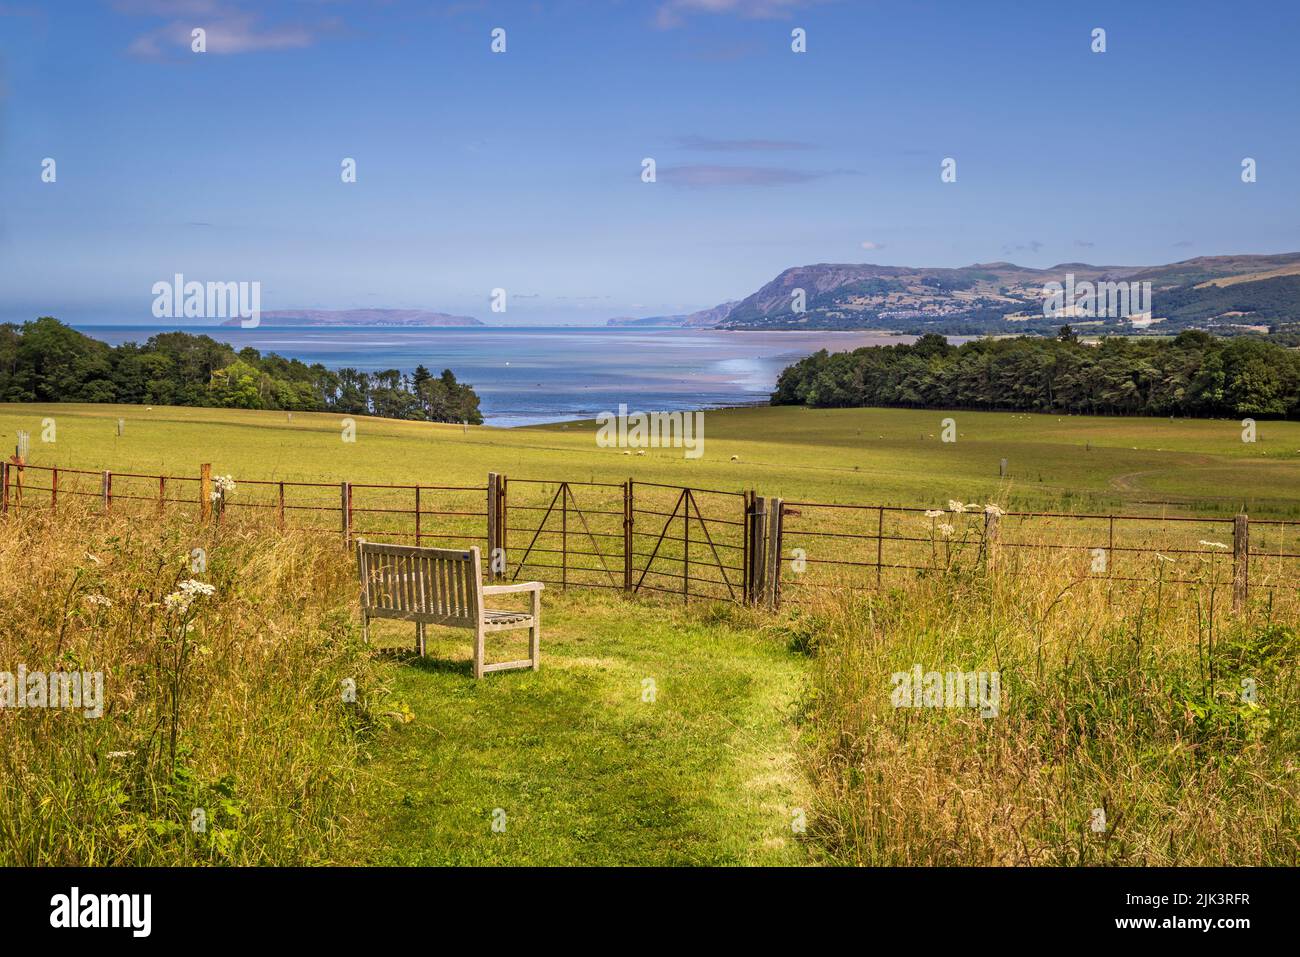 The view of the coast towards the Great Orme from the grounds of Penrhyn castle, Gwynedd, North Wales Stock Photo